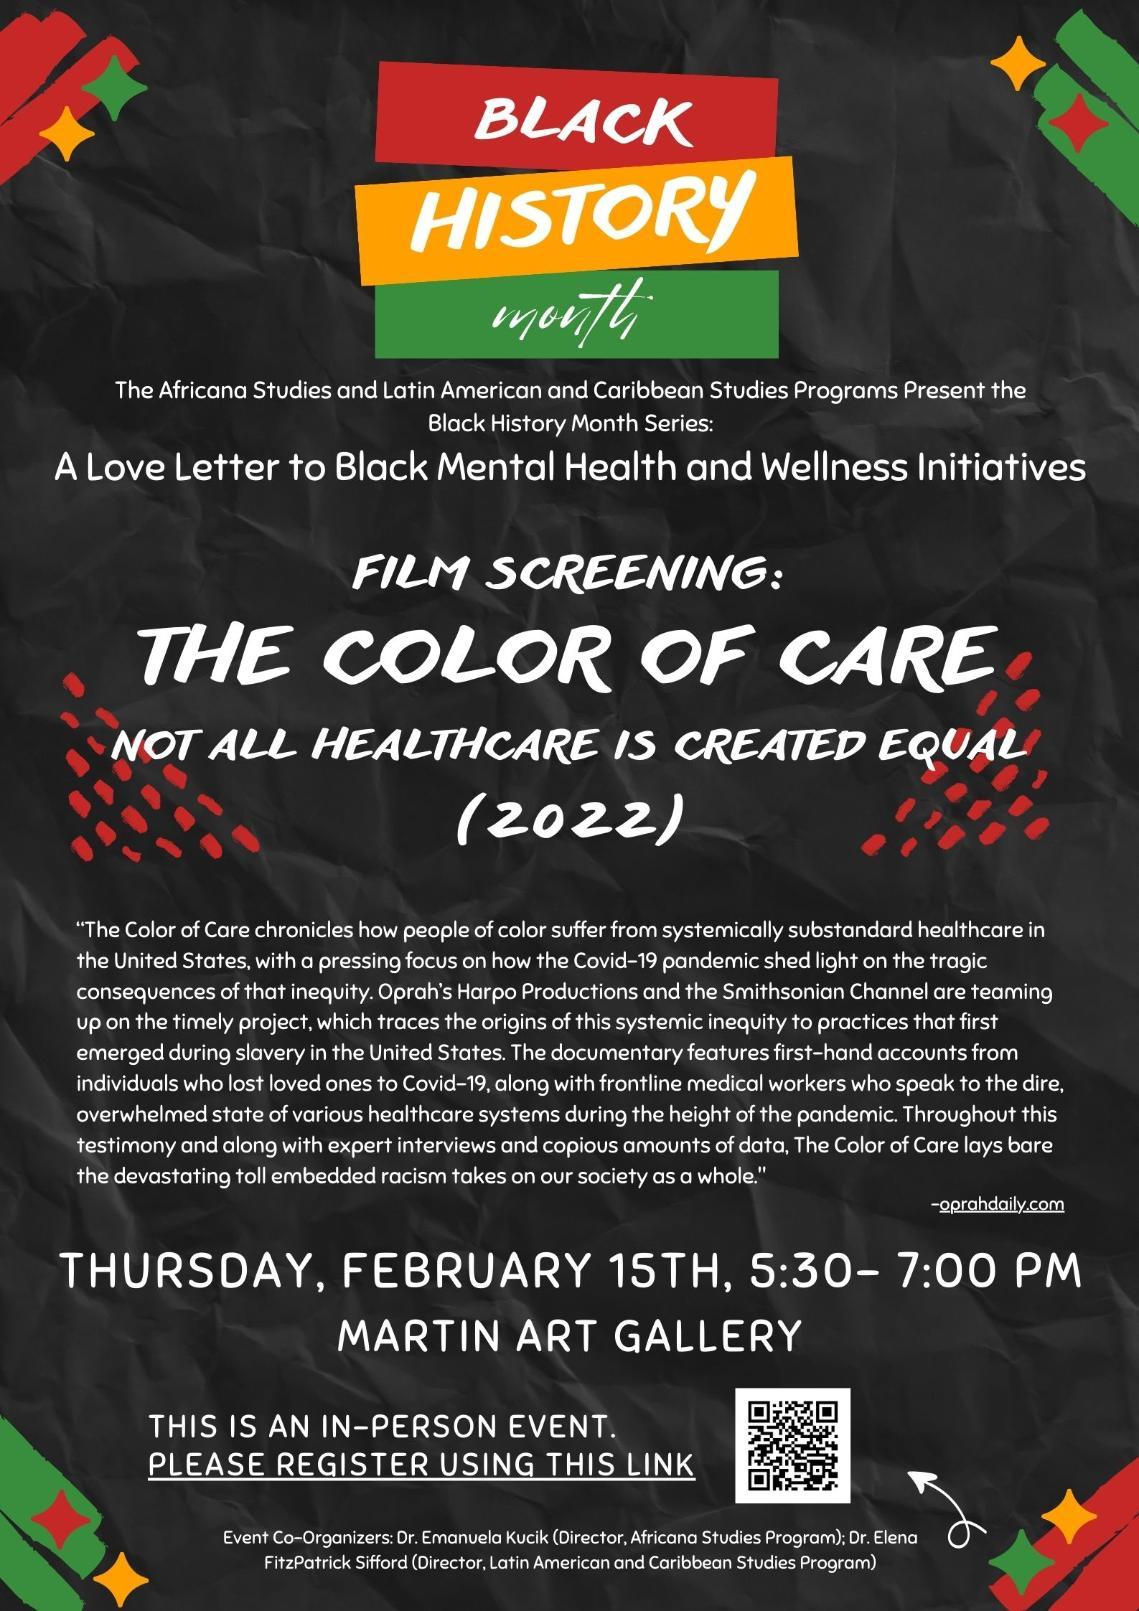 poster for film screening of The Color of Care on Feb. 15 at 5:30 in the Martin Art Gallery